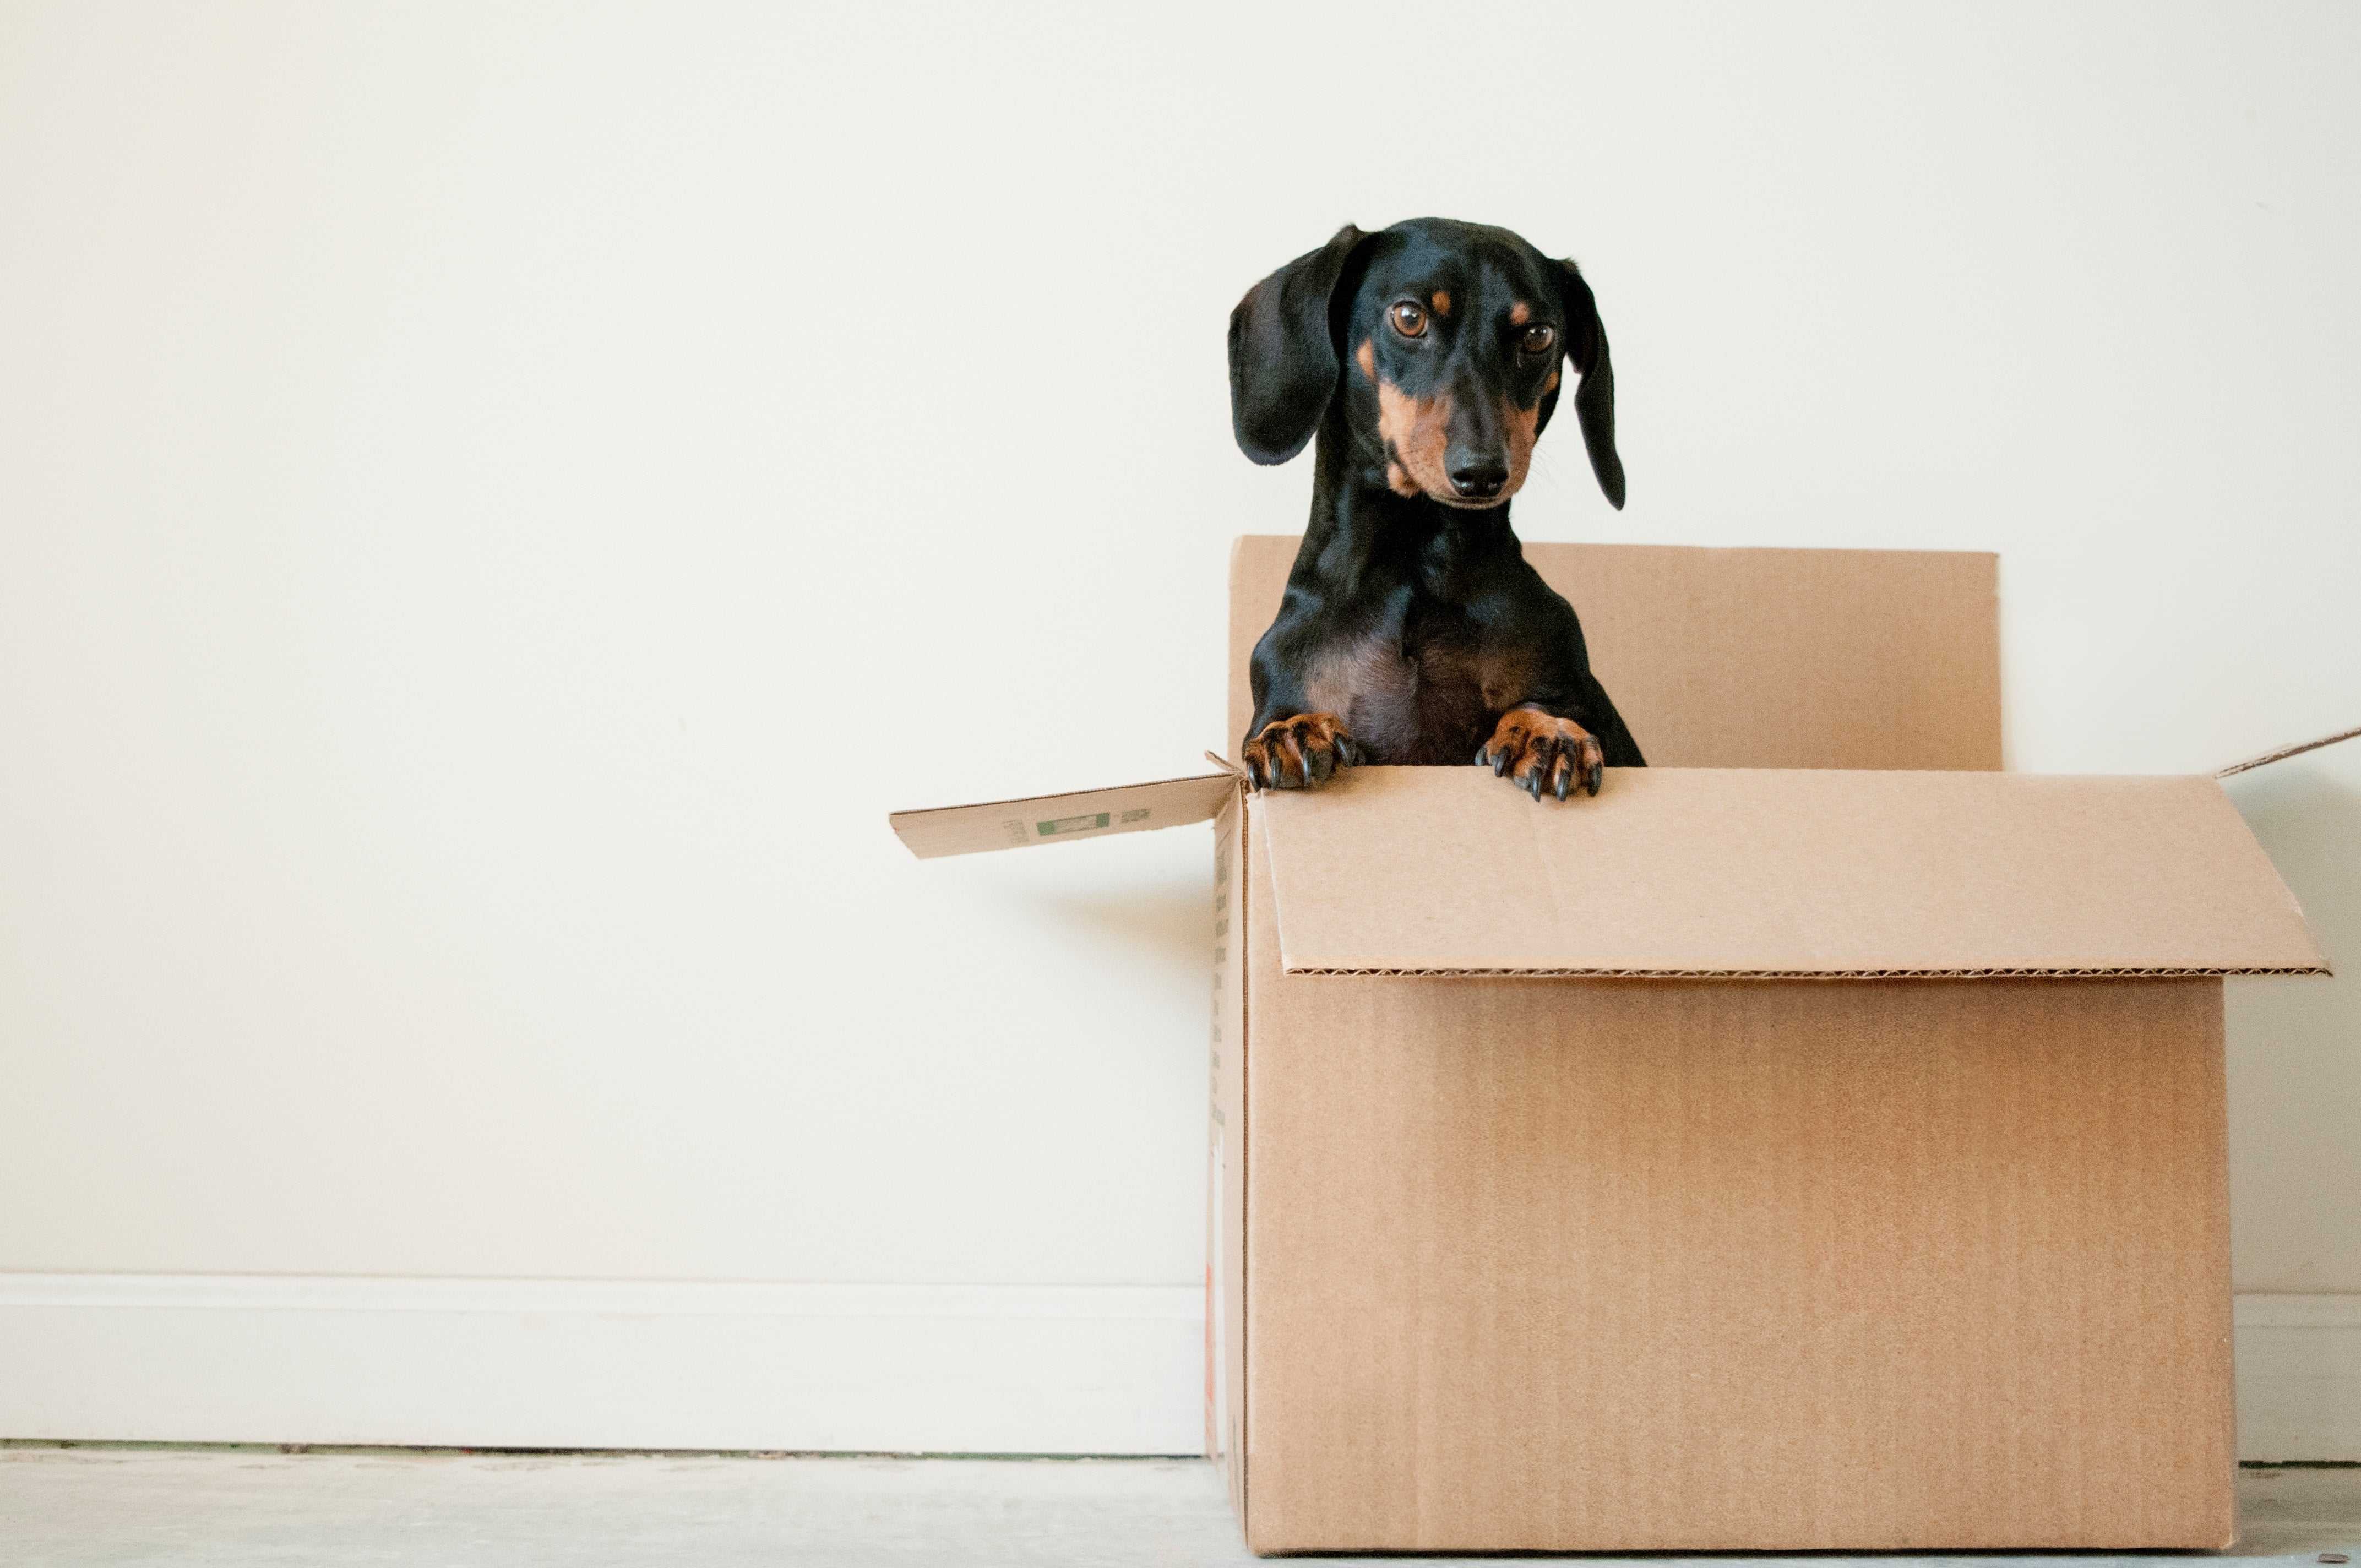 A sausage dog is propped up in a moving box